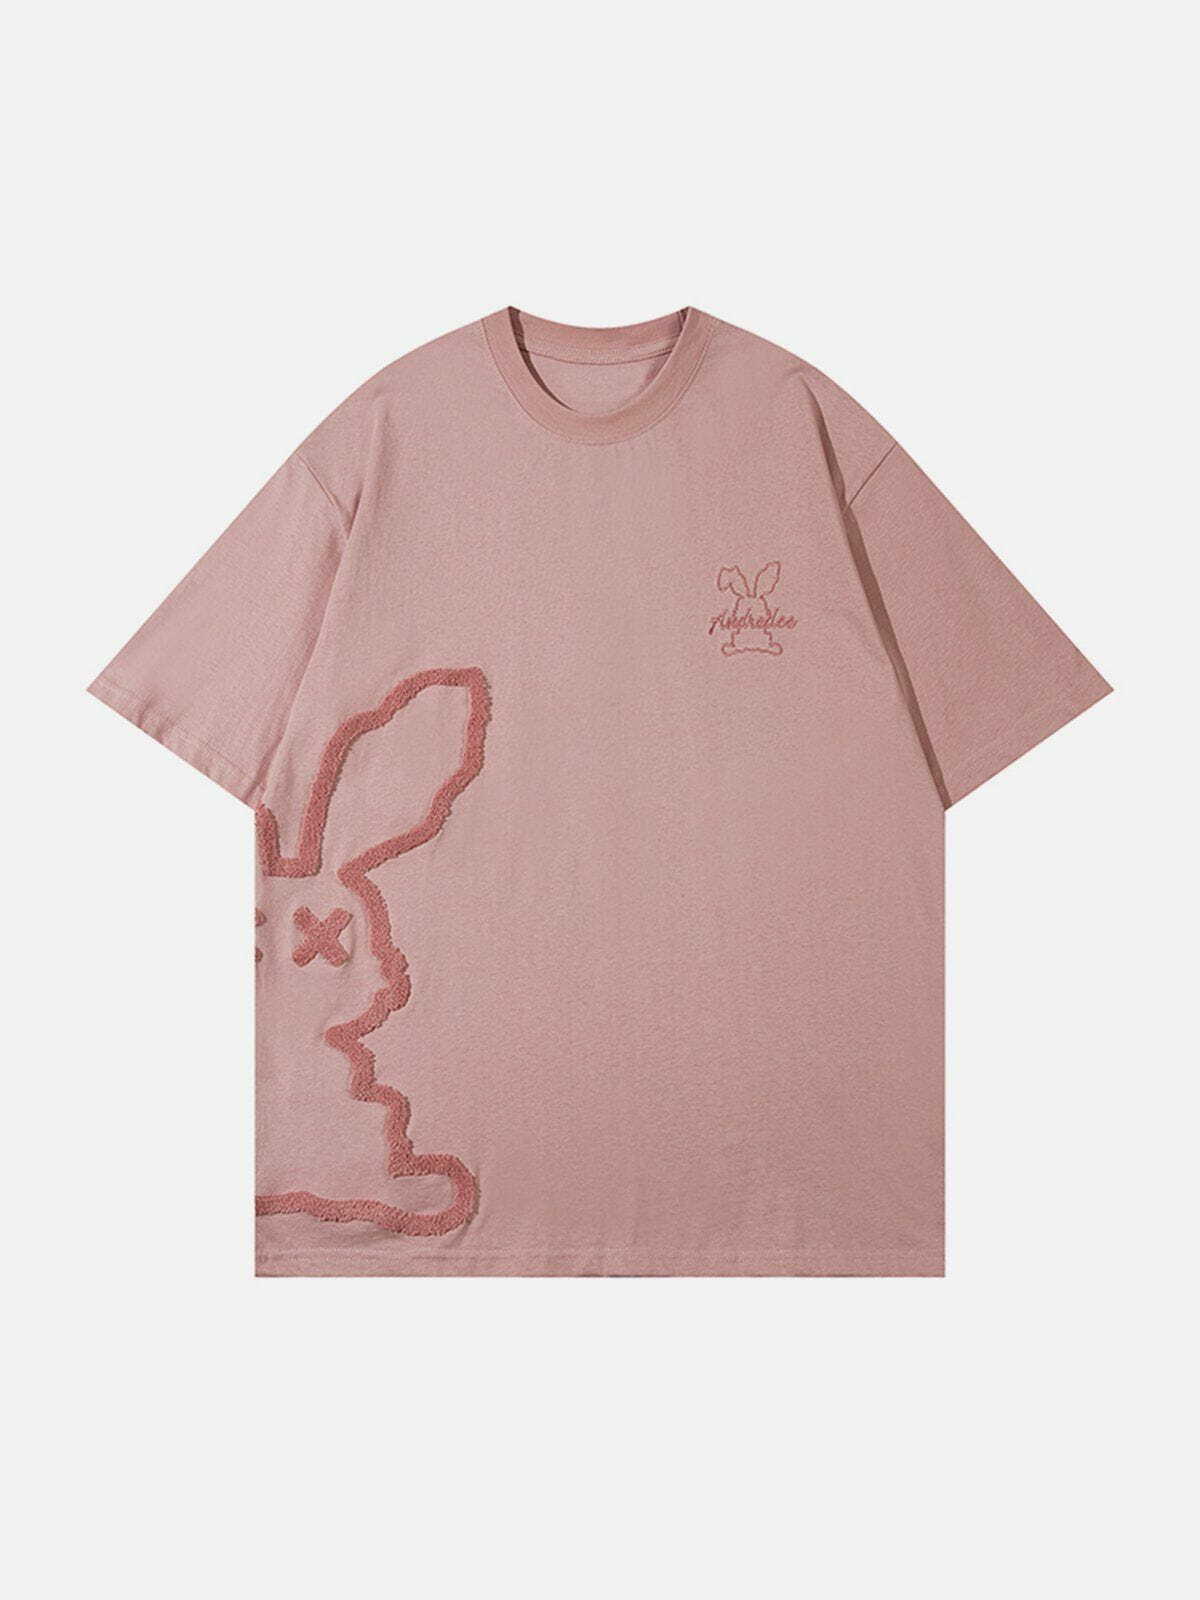 dynamic youthful� vibrant cutted rabbit embroidery tee 8771